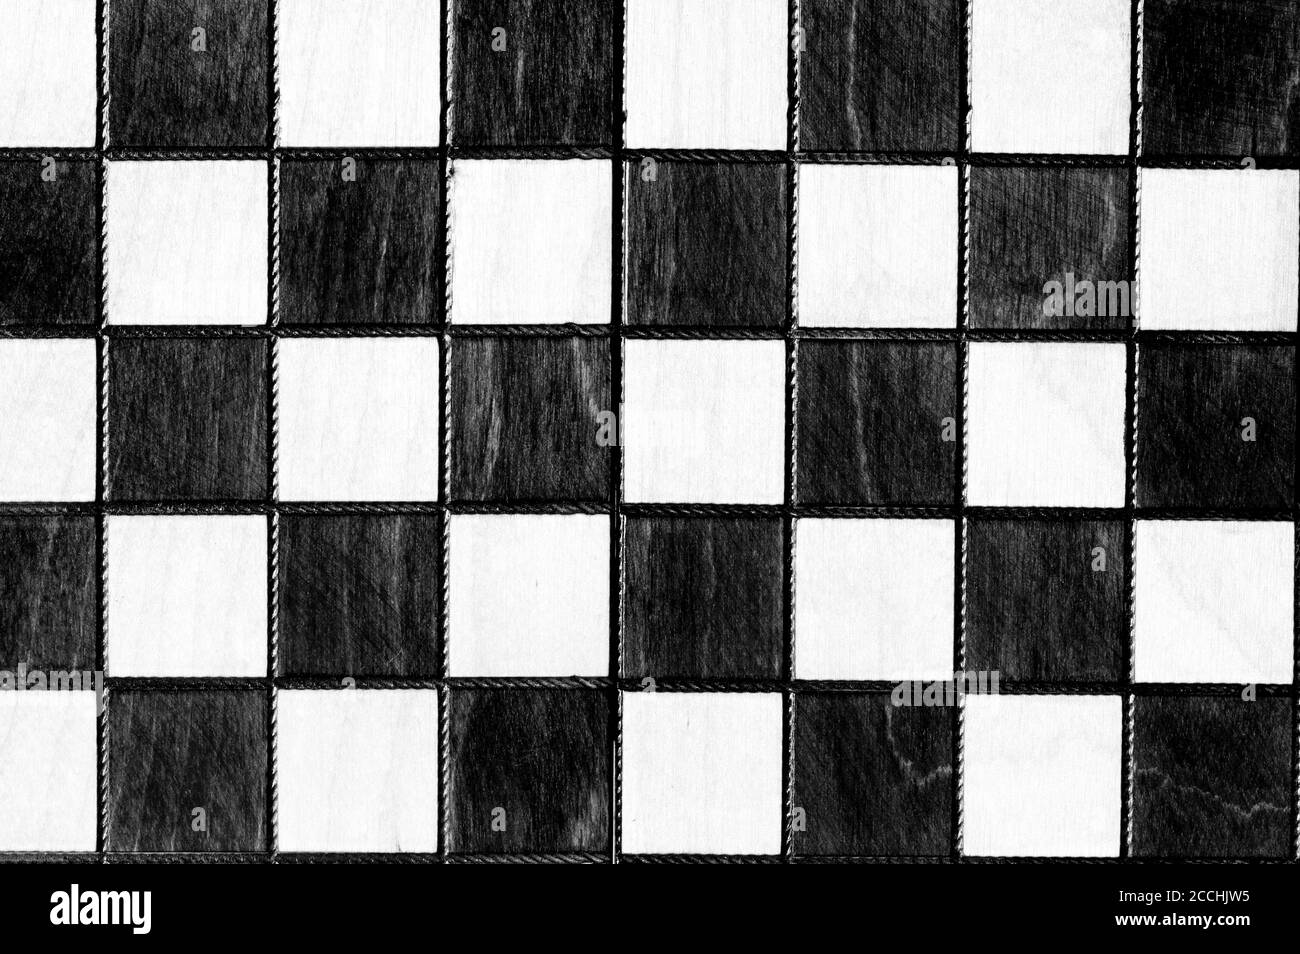 Chess Pieces Chessboard Wallpaper Black and White Antique 